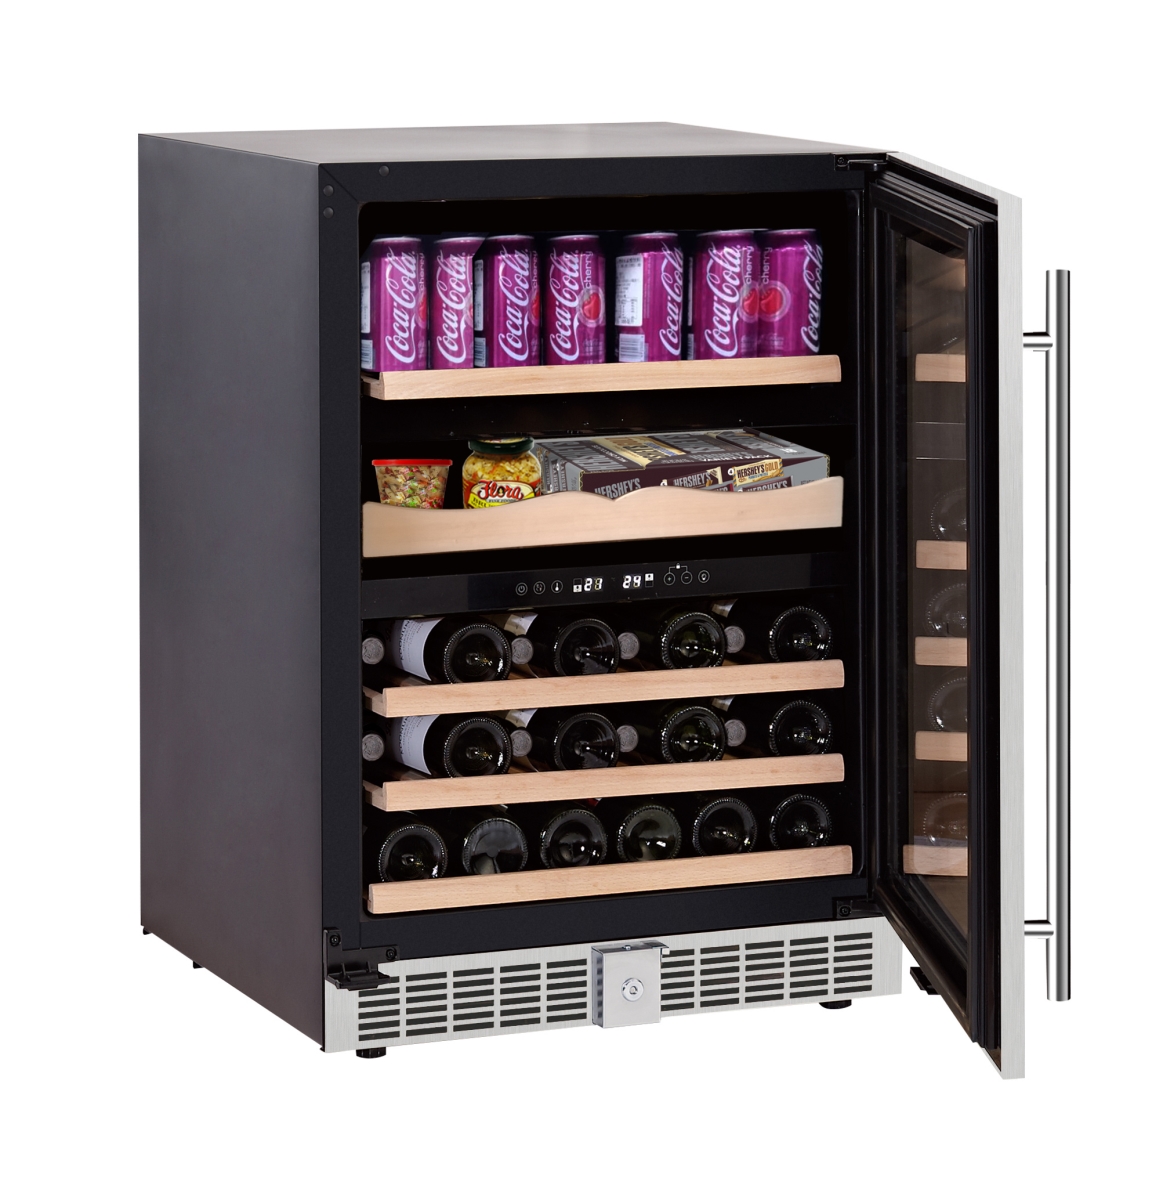 Picture of Equator Advanced Appliances GC 43 43 Bottle & 43 Can Luxury Gourmet Dual Zone Freestanding Wine Refrigerator